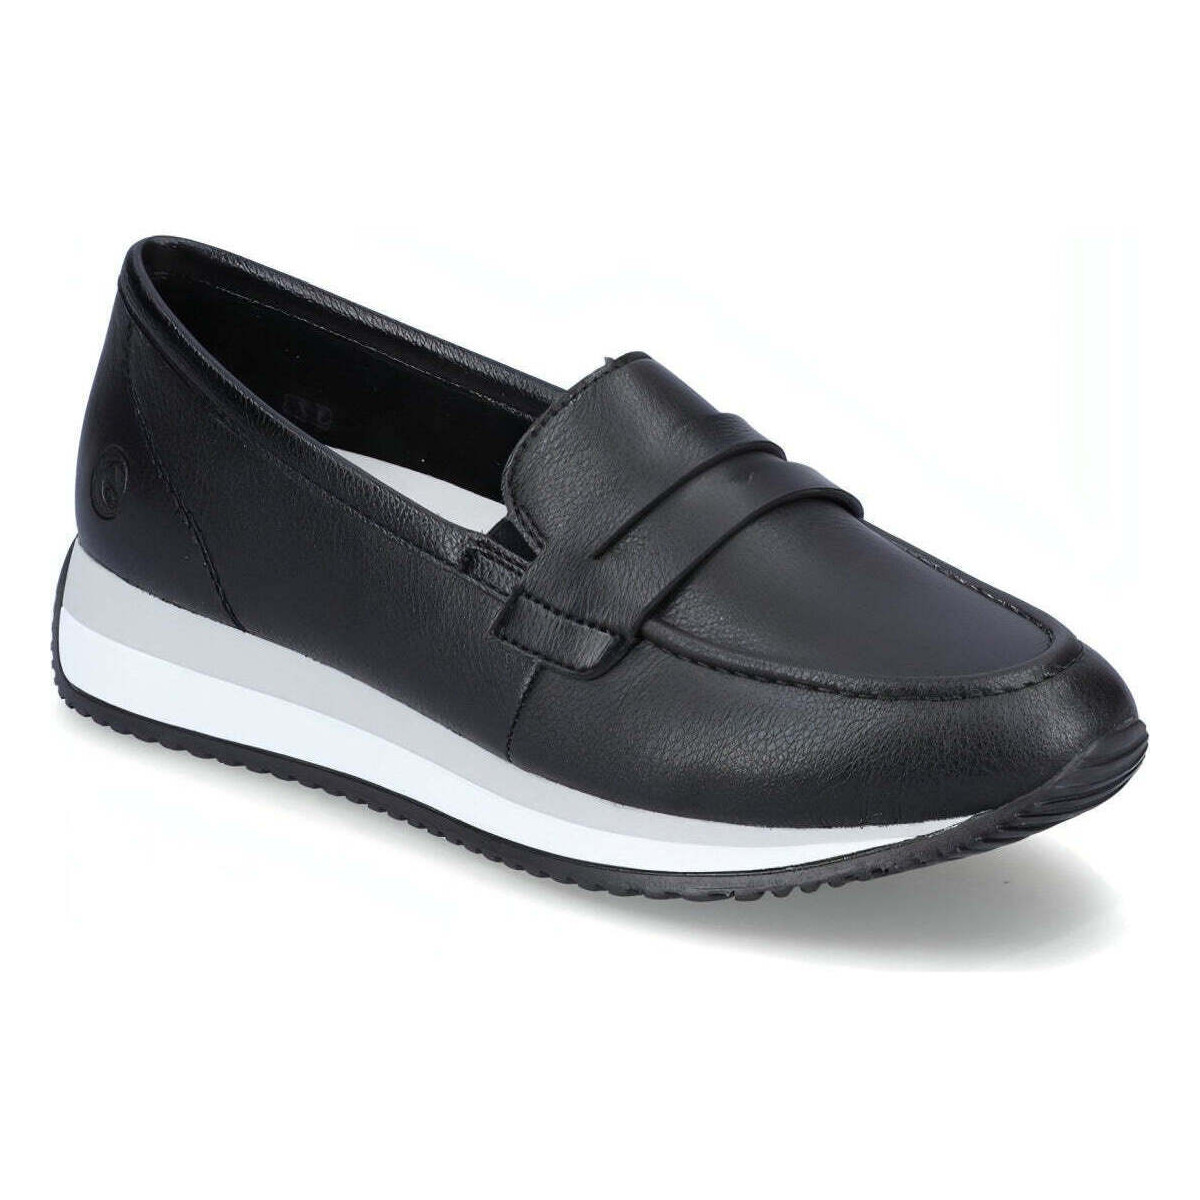 Chaussures Femme Mocassins Remonte black casual closed loafers Noir